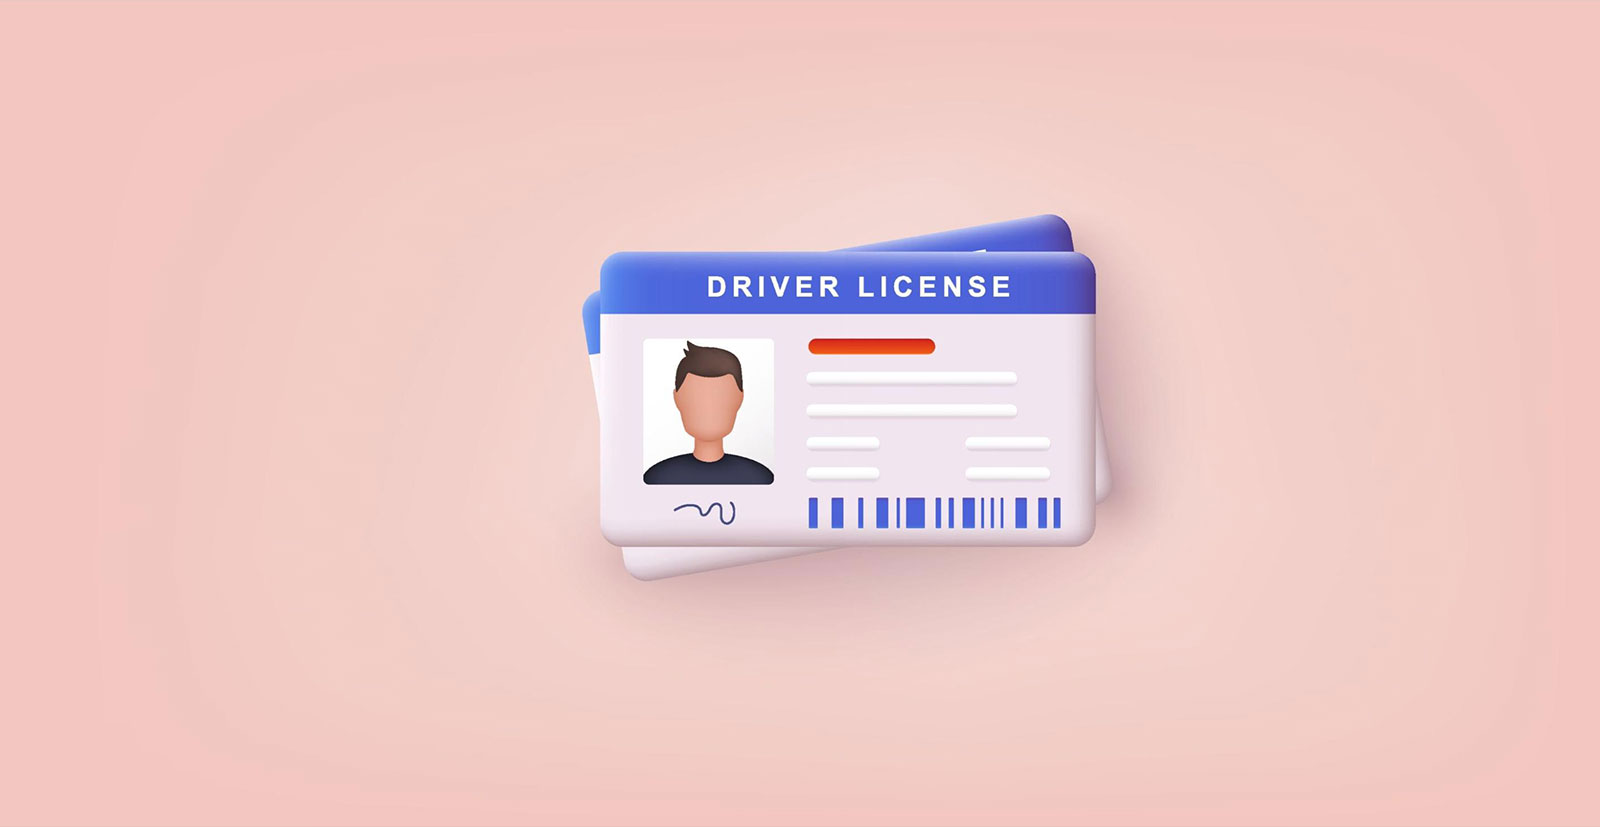 an illustration of a driver license